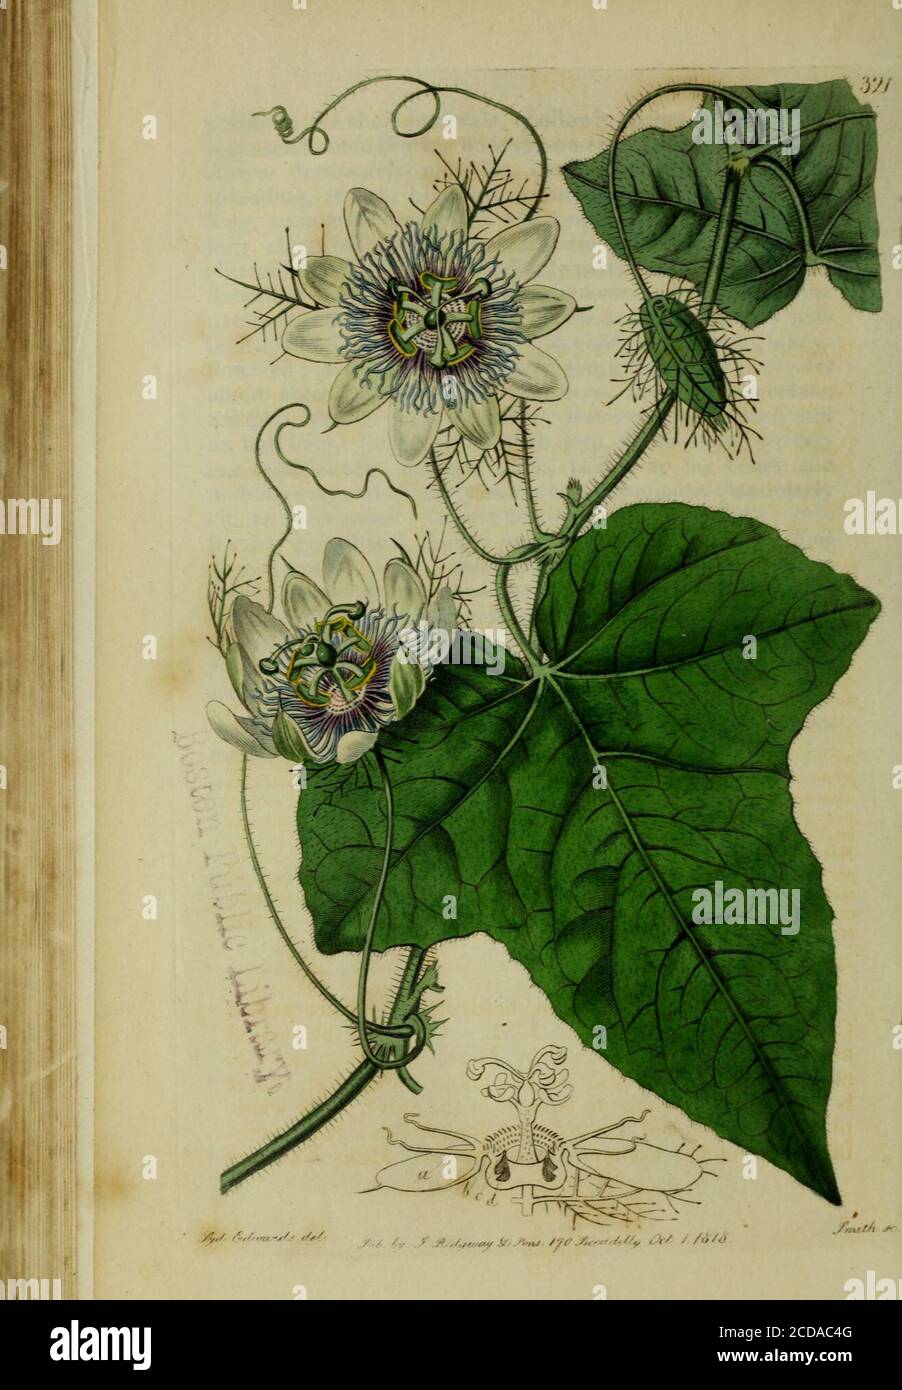 . The Botanical register consisting of coloured figures of . x at the under, con-nately sheathing at the base. Inflorescence compactly um-belled, terminal, subsessile: umbels contiguously twin, many-flowered ; peduncles exceedingly short, bracteate ; hractesabout three, close-pressed, foliaceous, linearly lanceolate,unequal, shorter than the calyx ; flowers about an inch andan half long. Calyx | of an inch deep, herbaceous, converg-ing cylindrically, narrow, thick, parted to far below themiddle; segments linearly lanceolate, acuminate,glandularlyciliate, subviscous. Corolla narrowly hypocrater Stock Photo